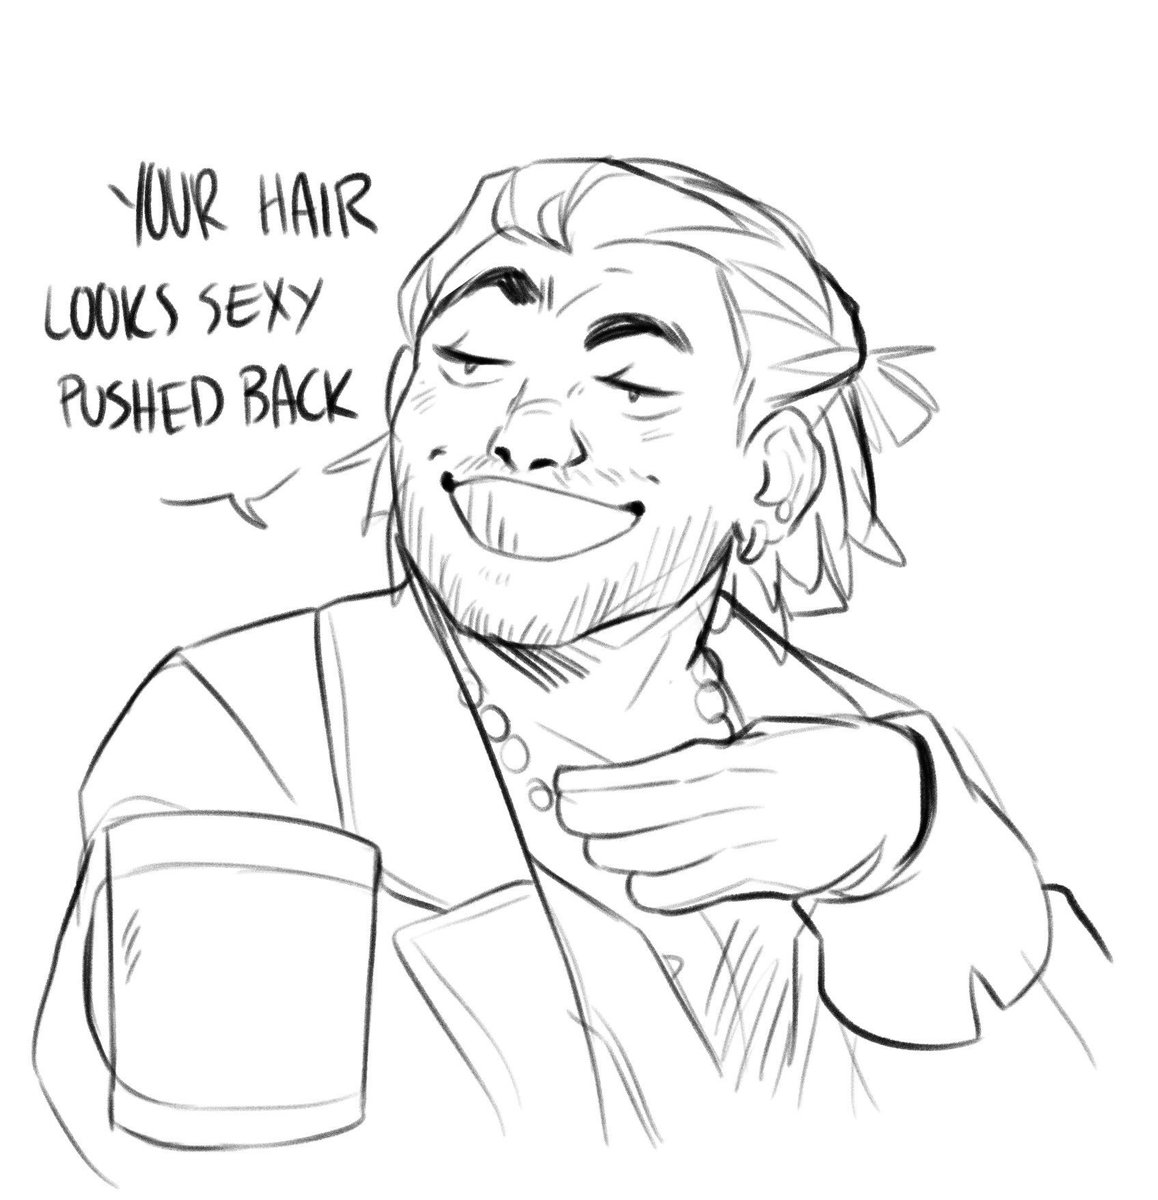 Varric is bestfriend of the year and fenris is just done with them 